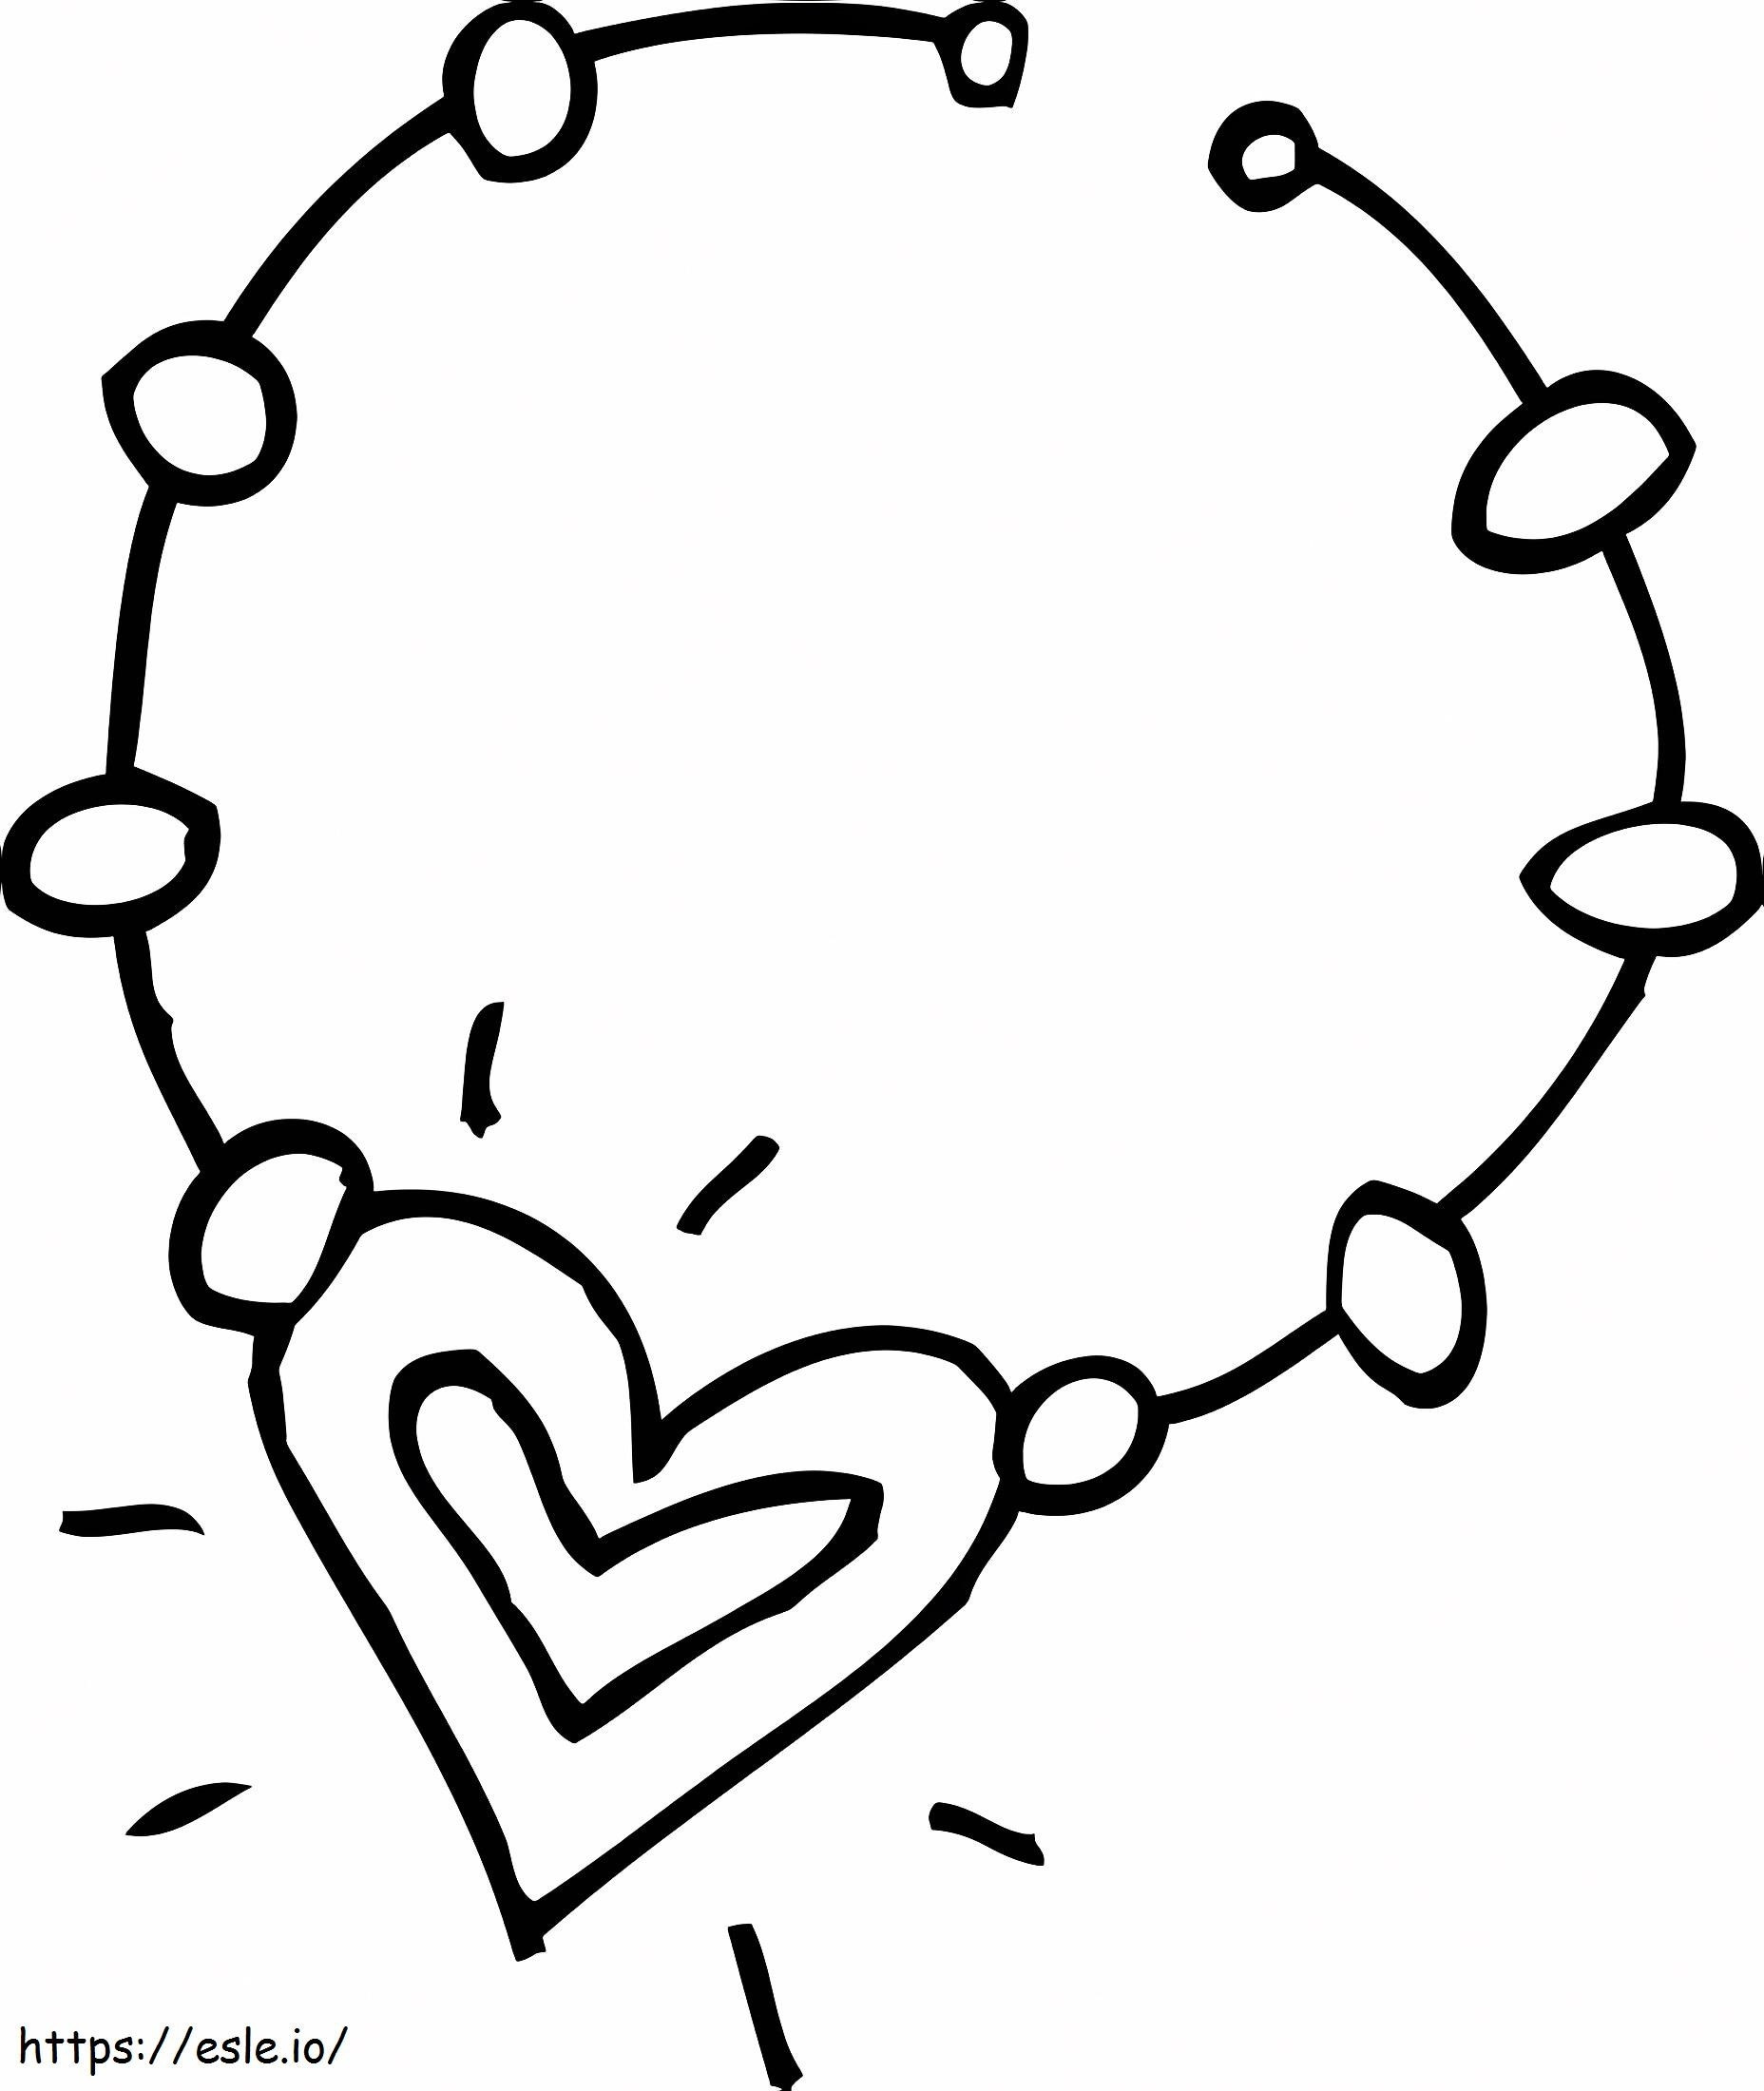 Heart Necklace coloring page